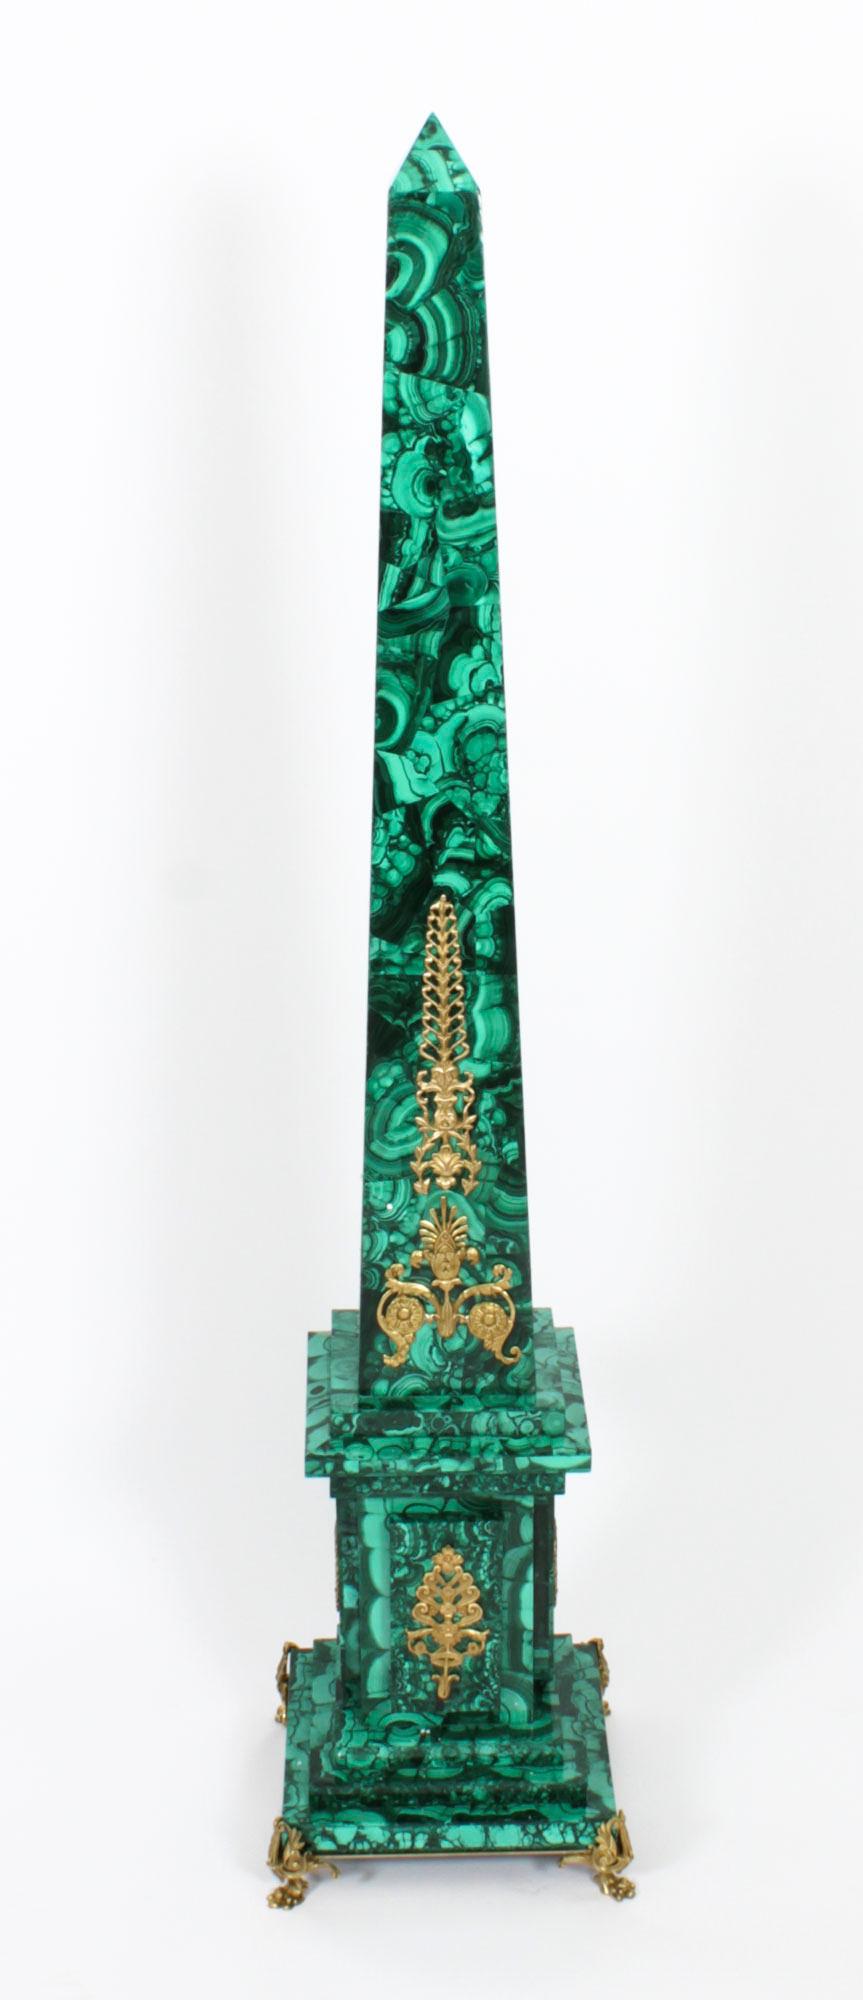 A monumental pair of Neoclassical ormolu mounted malachite obelisks, Circa 1920 in date.
 
The square conforming malachite columns taper to pyramid shapes with applied decorative gilt ormolu mounts.
 
The obelisks stand on malachite stepped